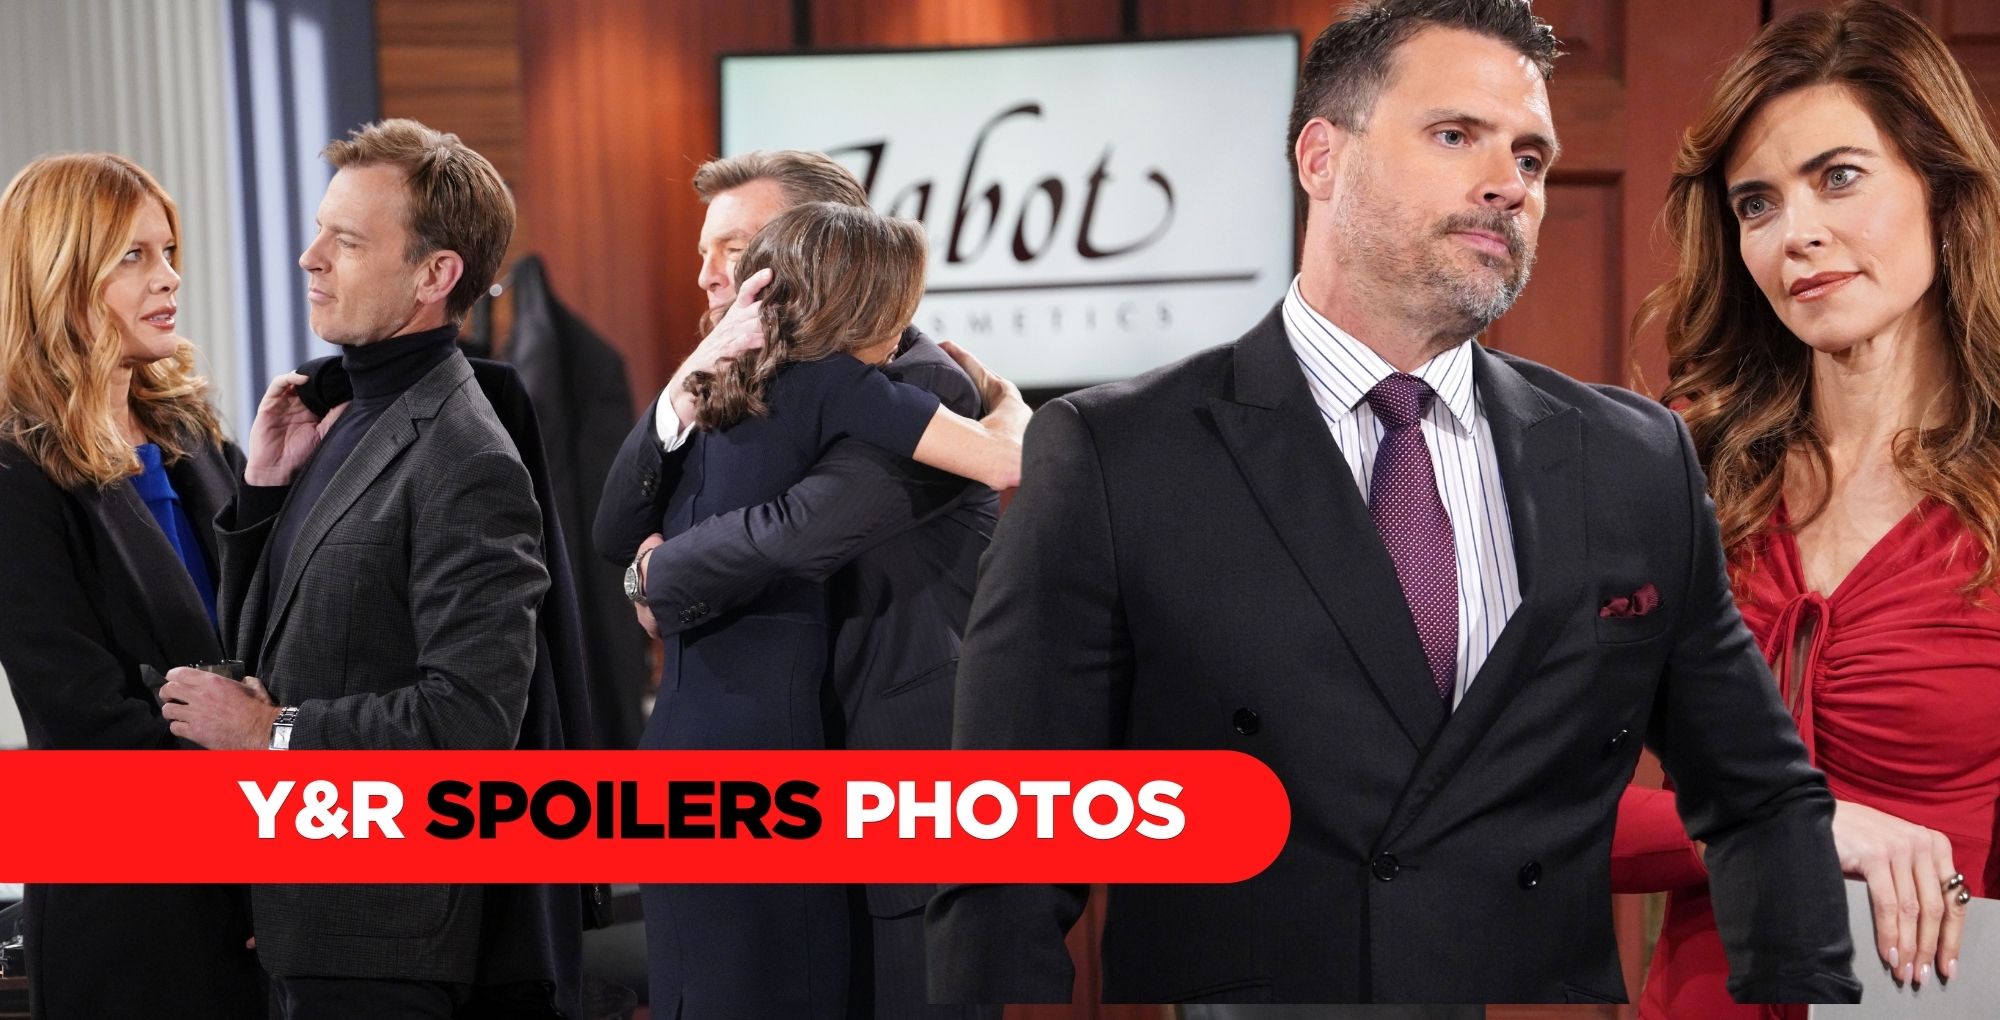 Y&R Spoilers Photos: Office Politics and Business Blunders